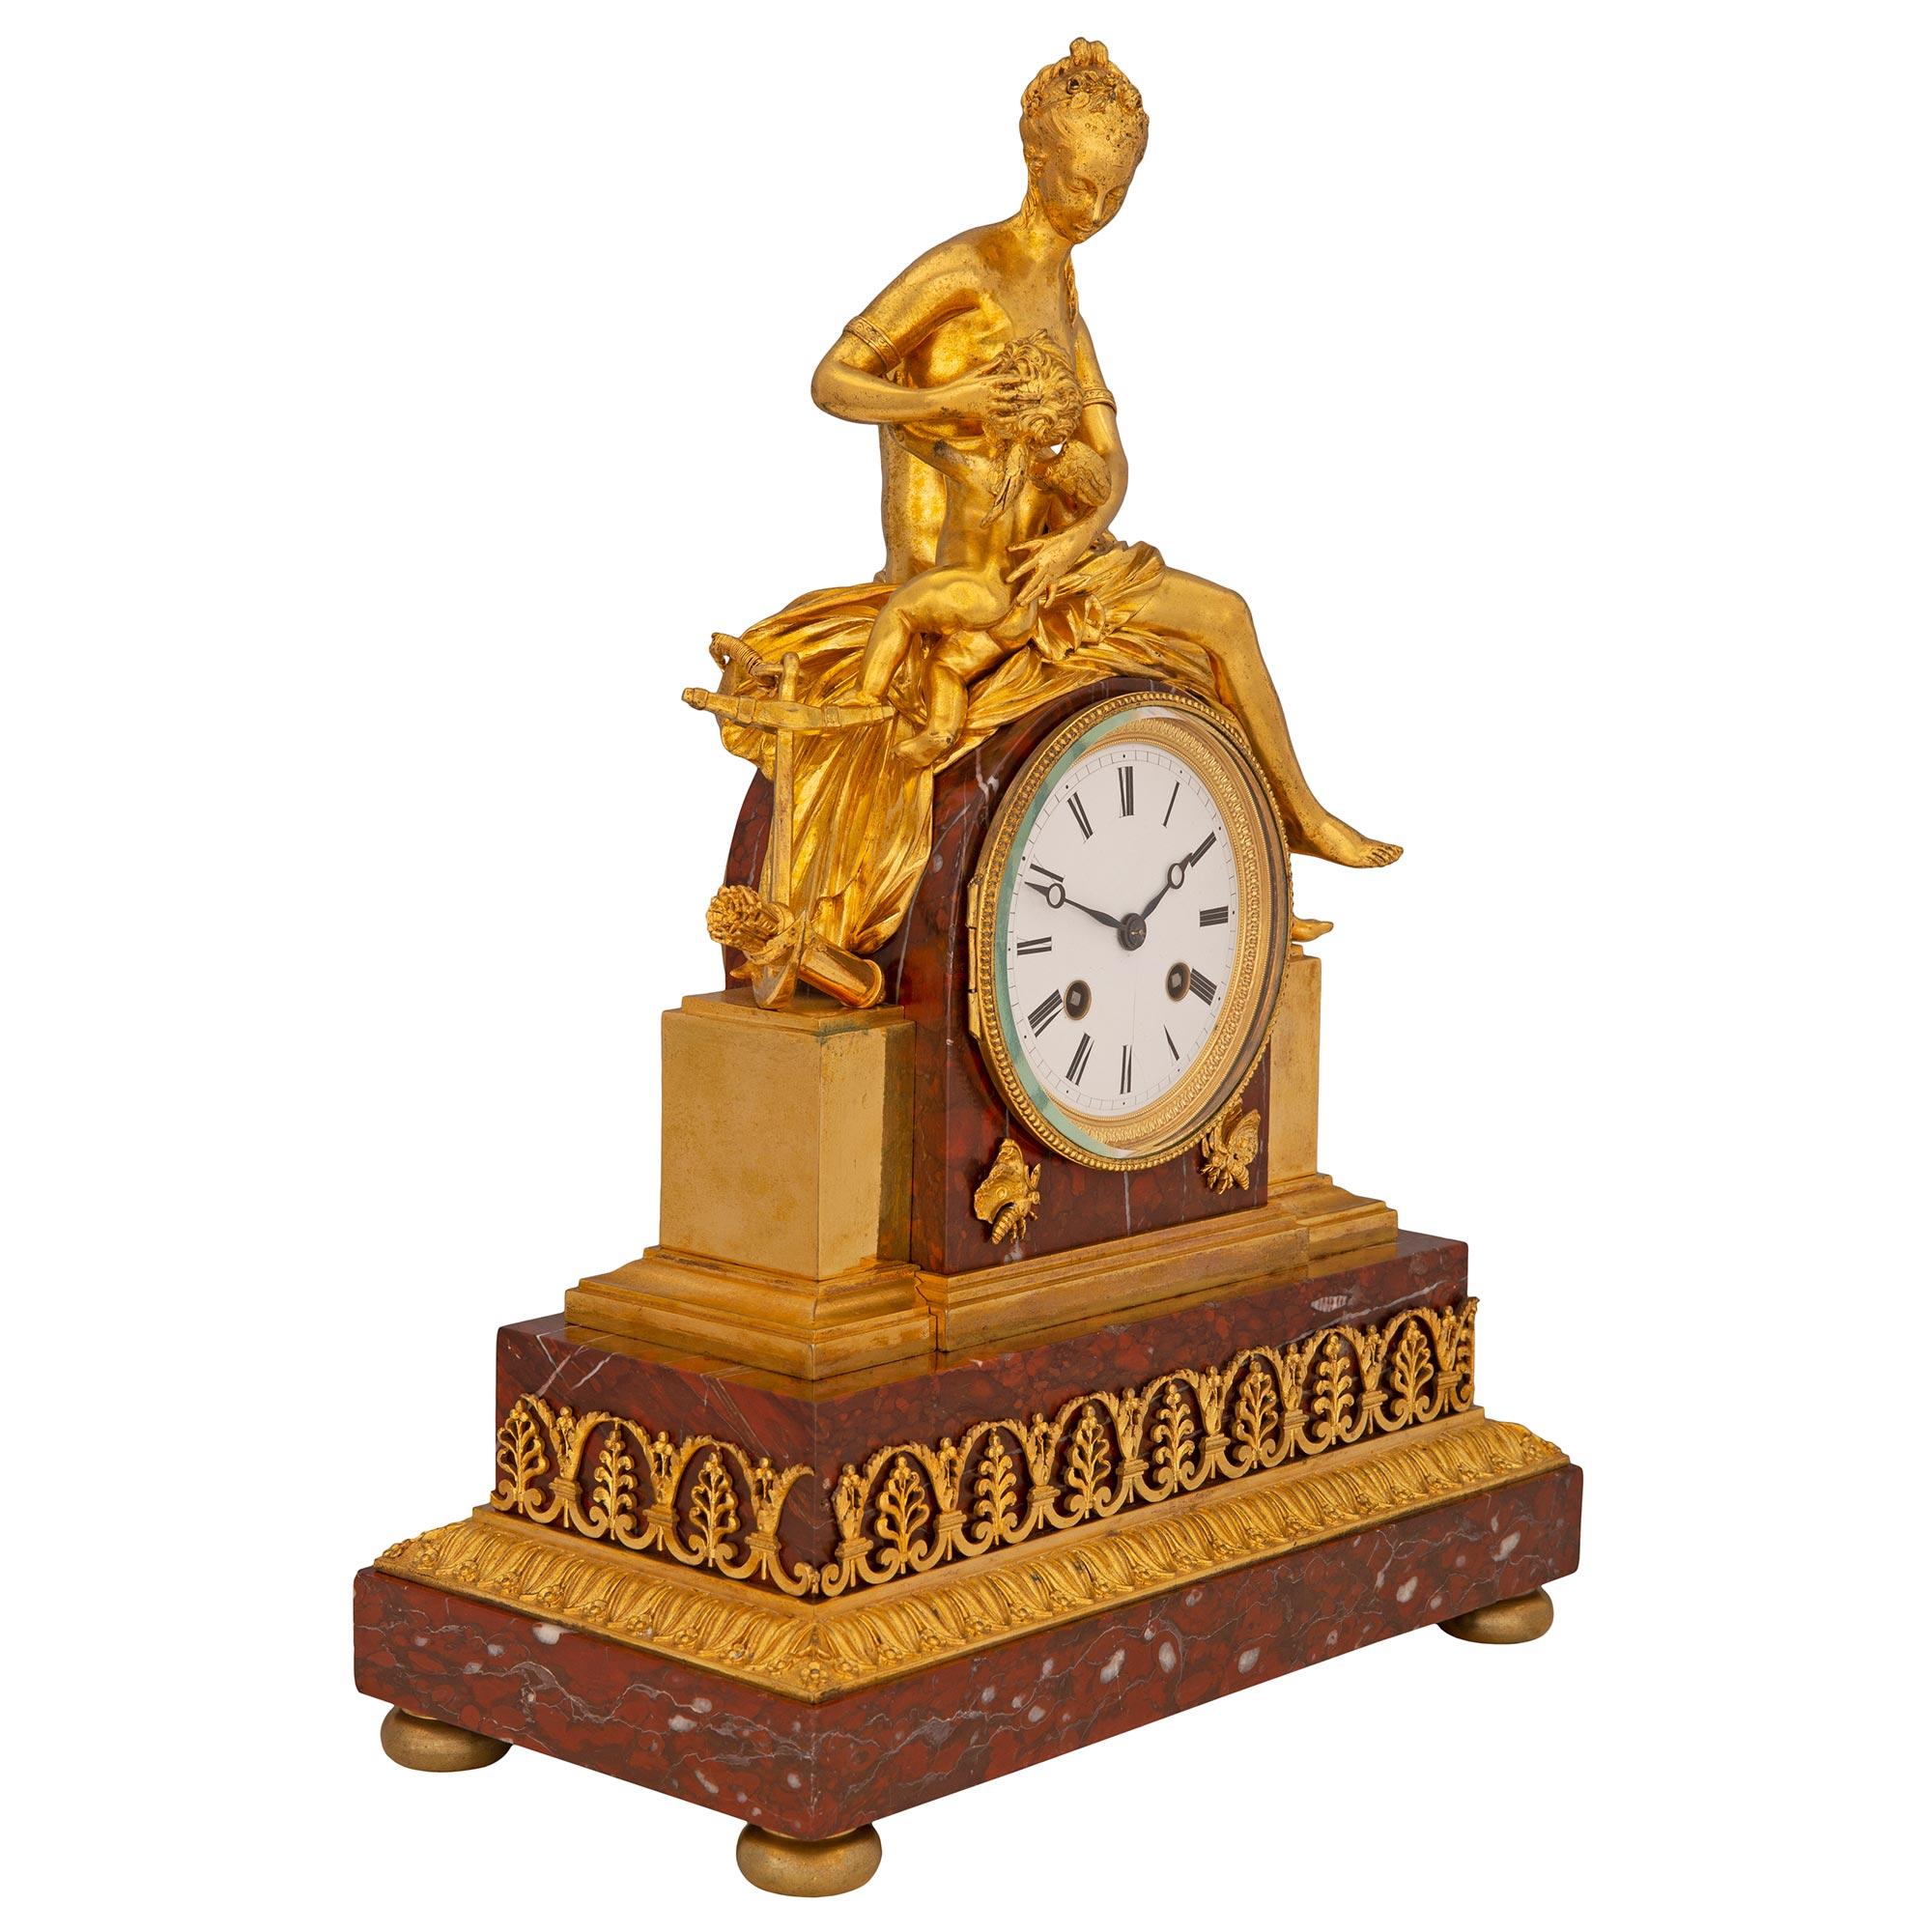 A striking and most decorative French 19th century Neo-Classical st. ormolu and Rouge Griotte marble three piece garniture set signed Japy Frères. The impressive clock, which Japy Frères won a gold metal for this clock in 1855, at the center is